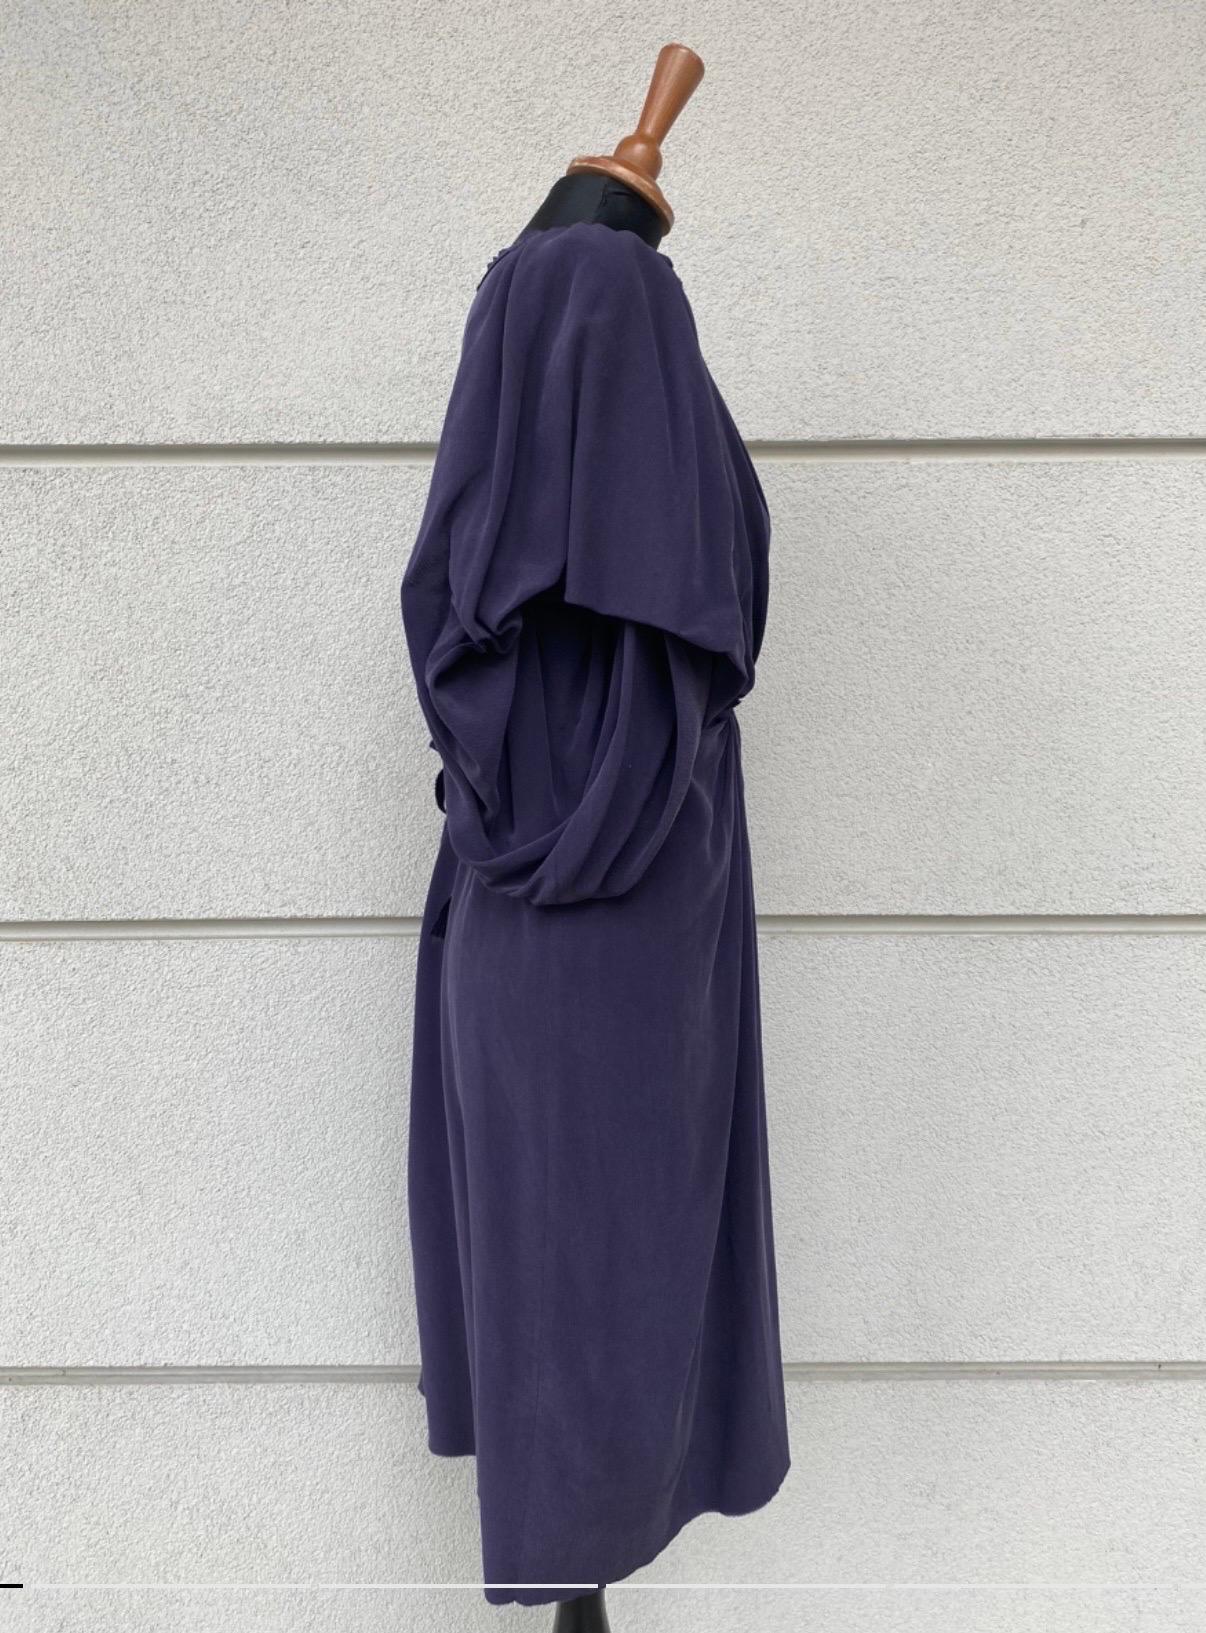 Lanvin midi dress, summer 2007.
French size 40 (Italian 44) in washed silk as shown on the tag, in purple with very wide sleeves. Featuring a belt at the waist always in the same material, the bottom of the dress is raw, measurements: length 95 cm,